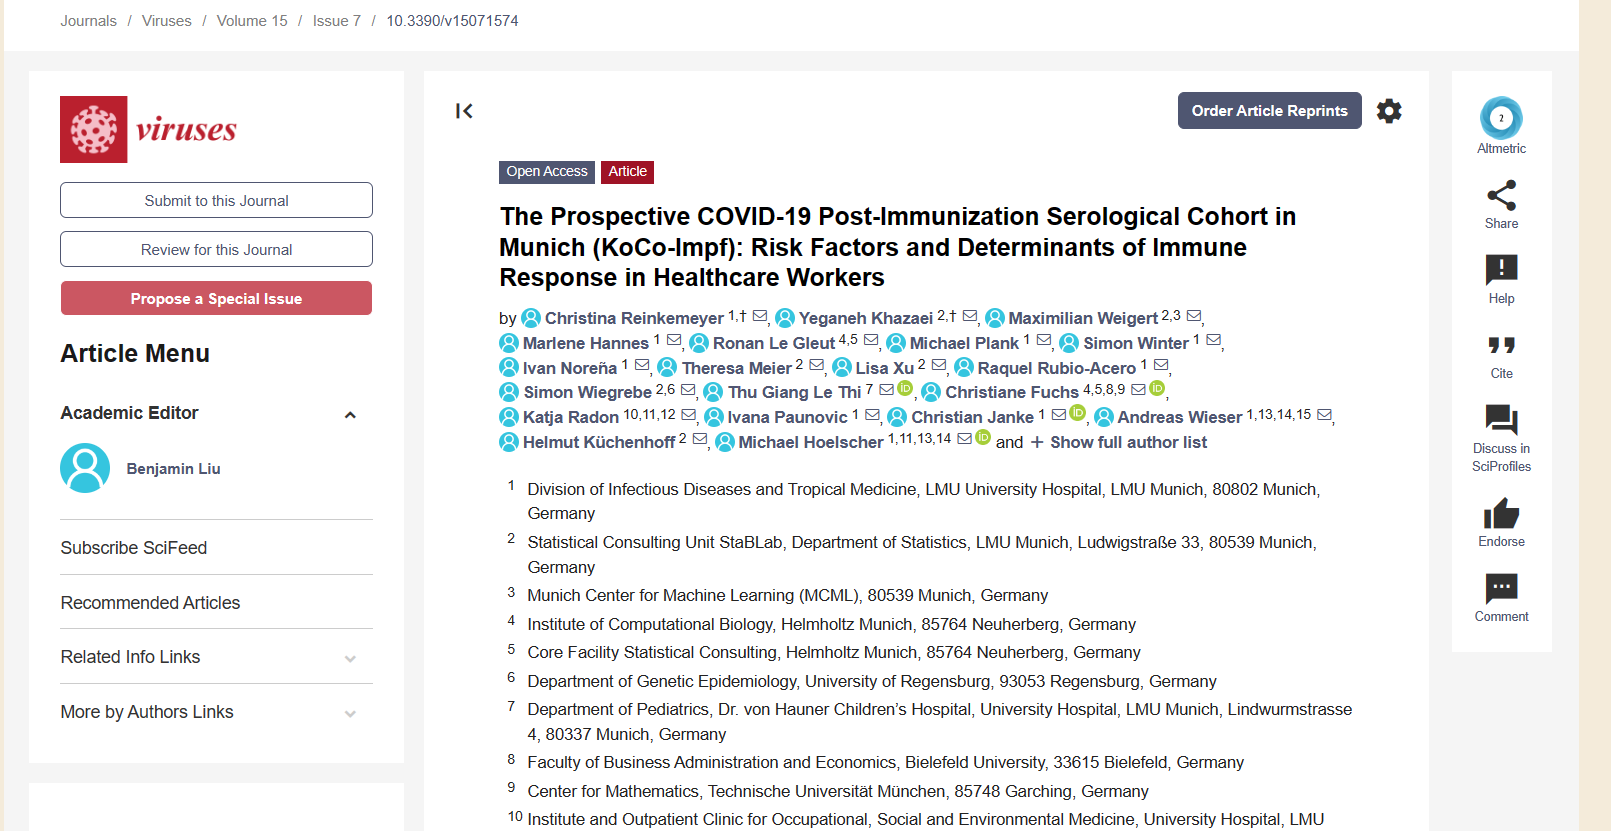 The Prospective COVID-19 Post-Immunization Serological Cohort in Munich (KoCo-Impf): Risk Factors and Determinants of Immune Response in Healthcare Workers